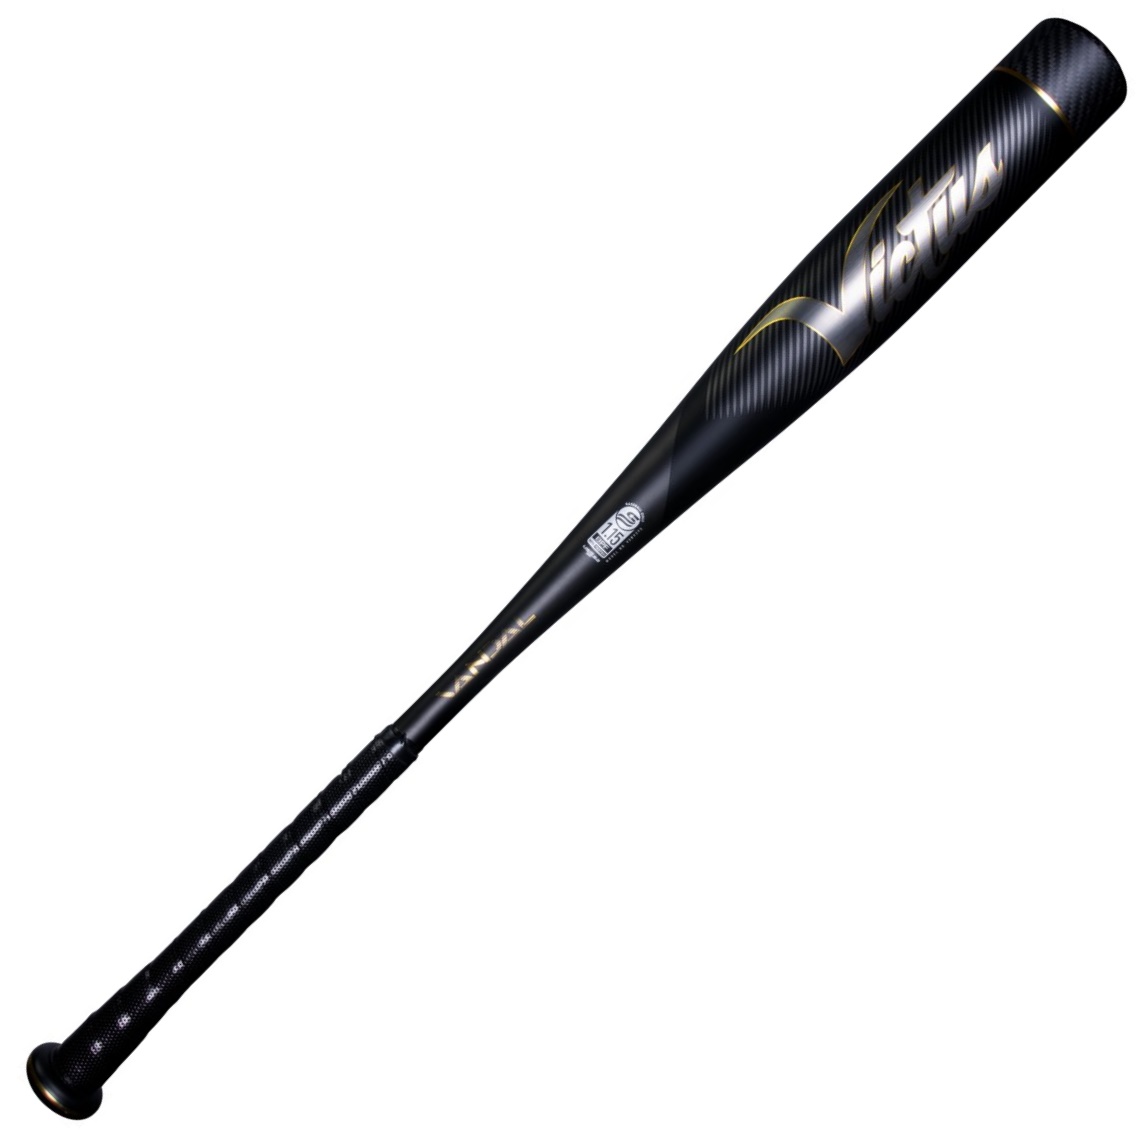 victus-vandal-2-bbcor-2022-baseball-bat-32-inch-29-oz VCBV2-3229 Victus 840078703591 In baseball speed is everything. That’s why Victus designed the Vandal using